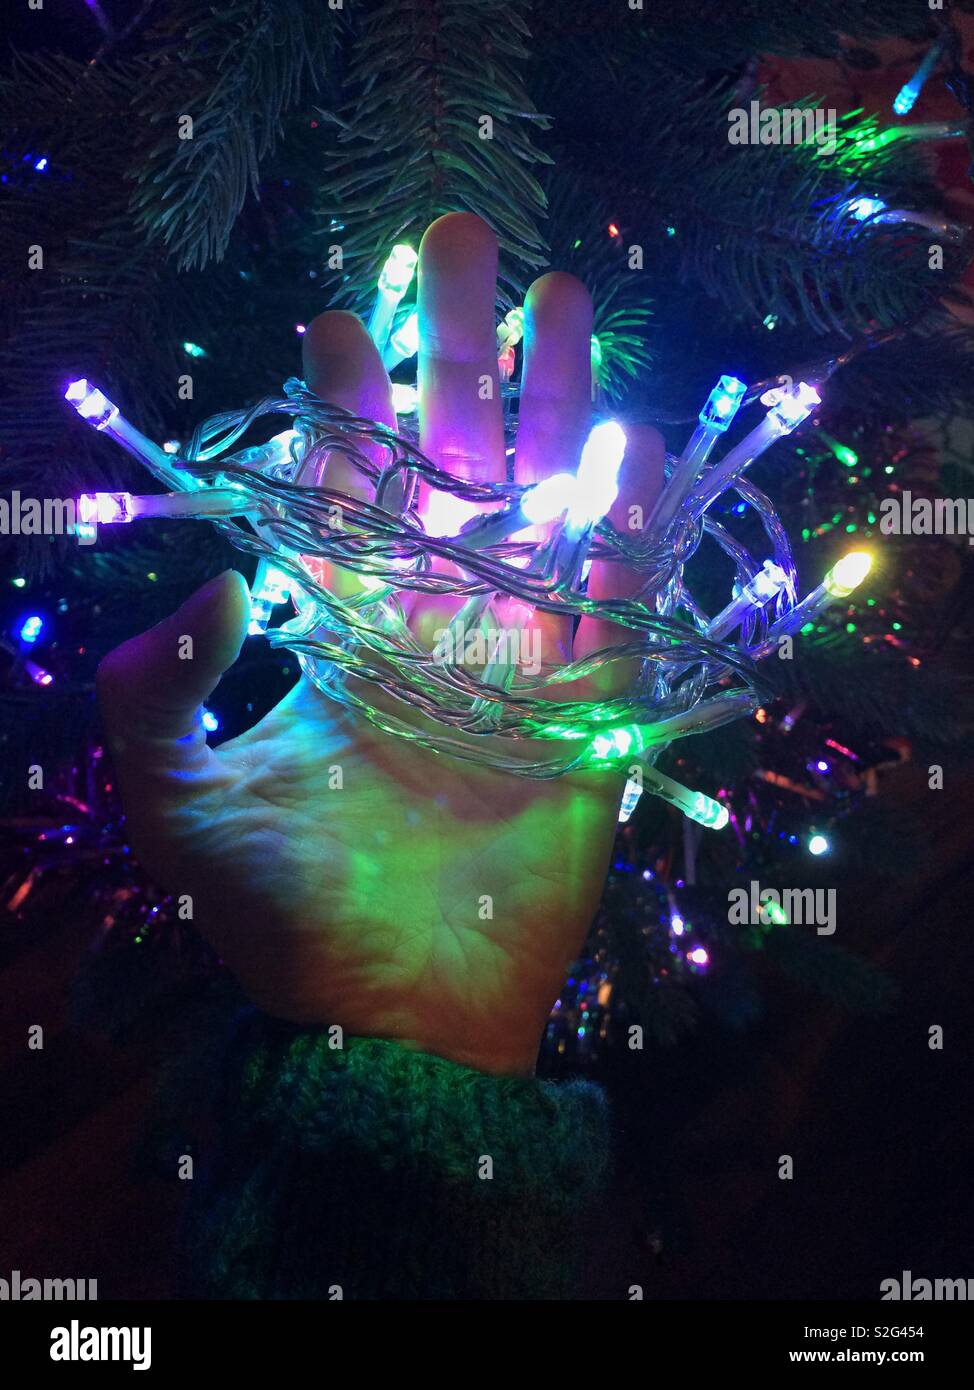 Taking down (or putting up) the Christmas tree decorations - woman’s hand with fairy lights wrapped around it Stock Photo